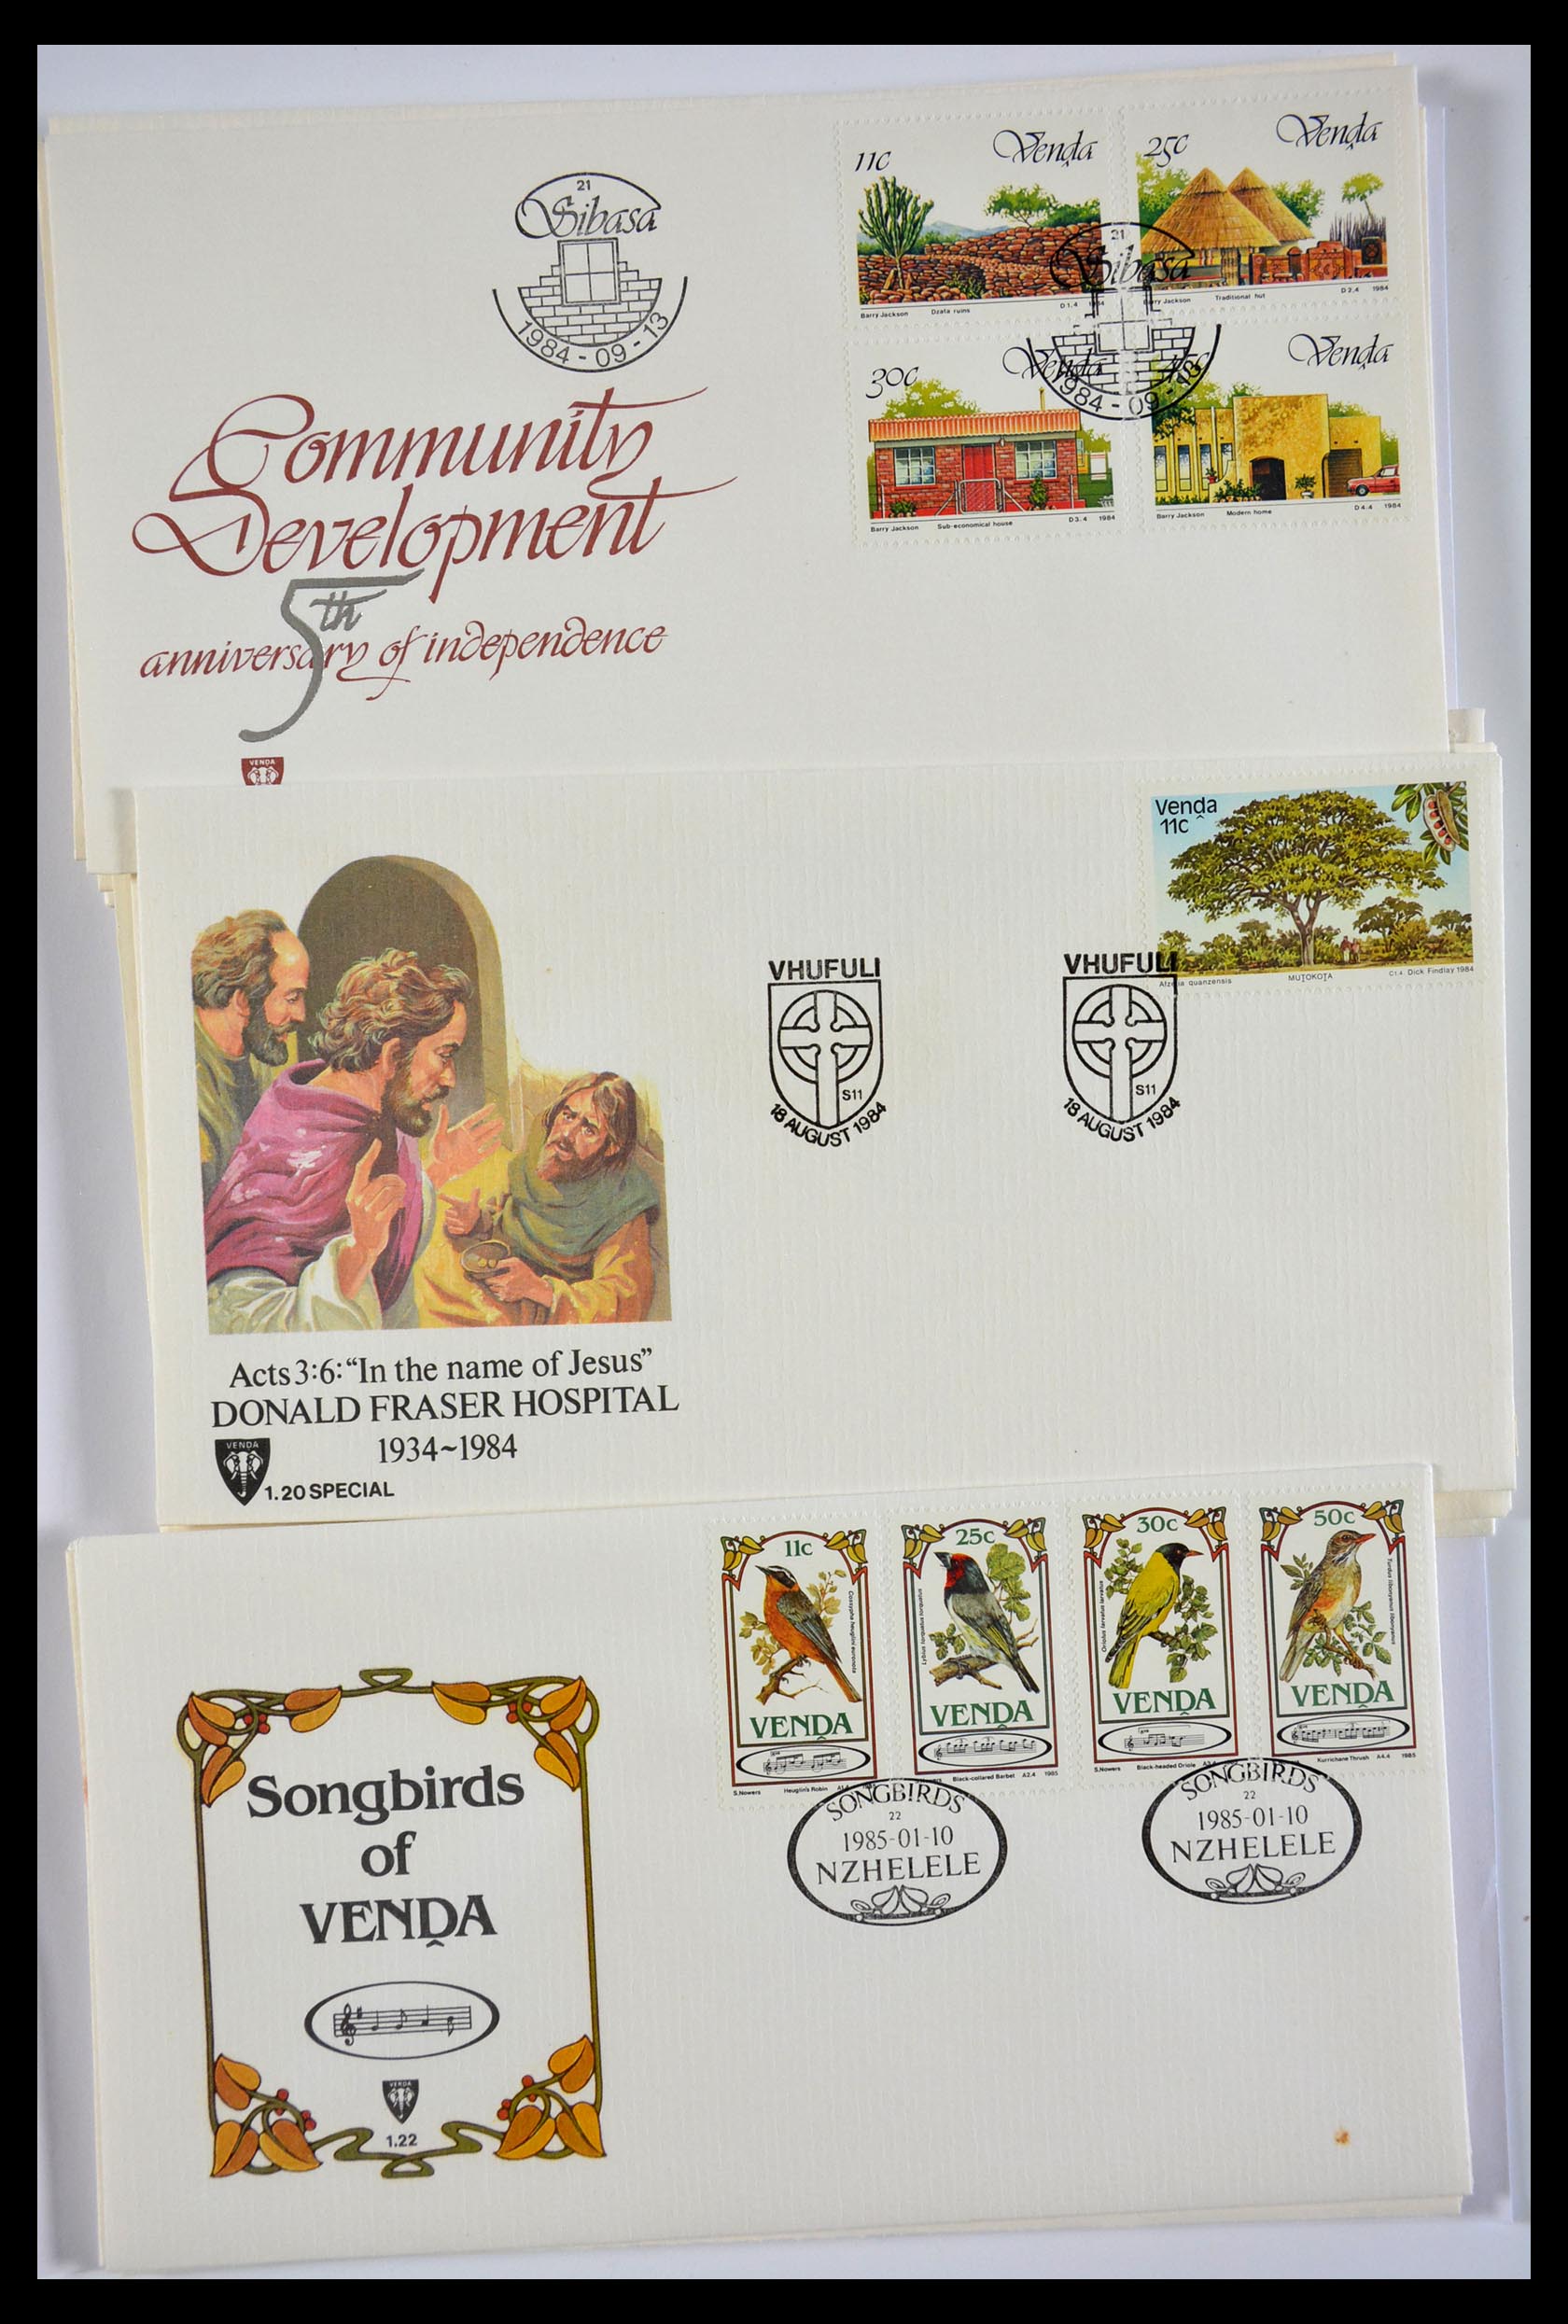 29356 588 - 29356 South Africa homelands first day covers 1979-1991.